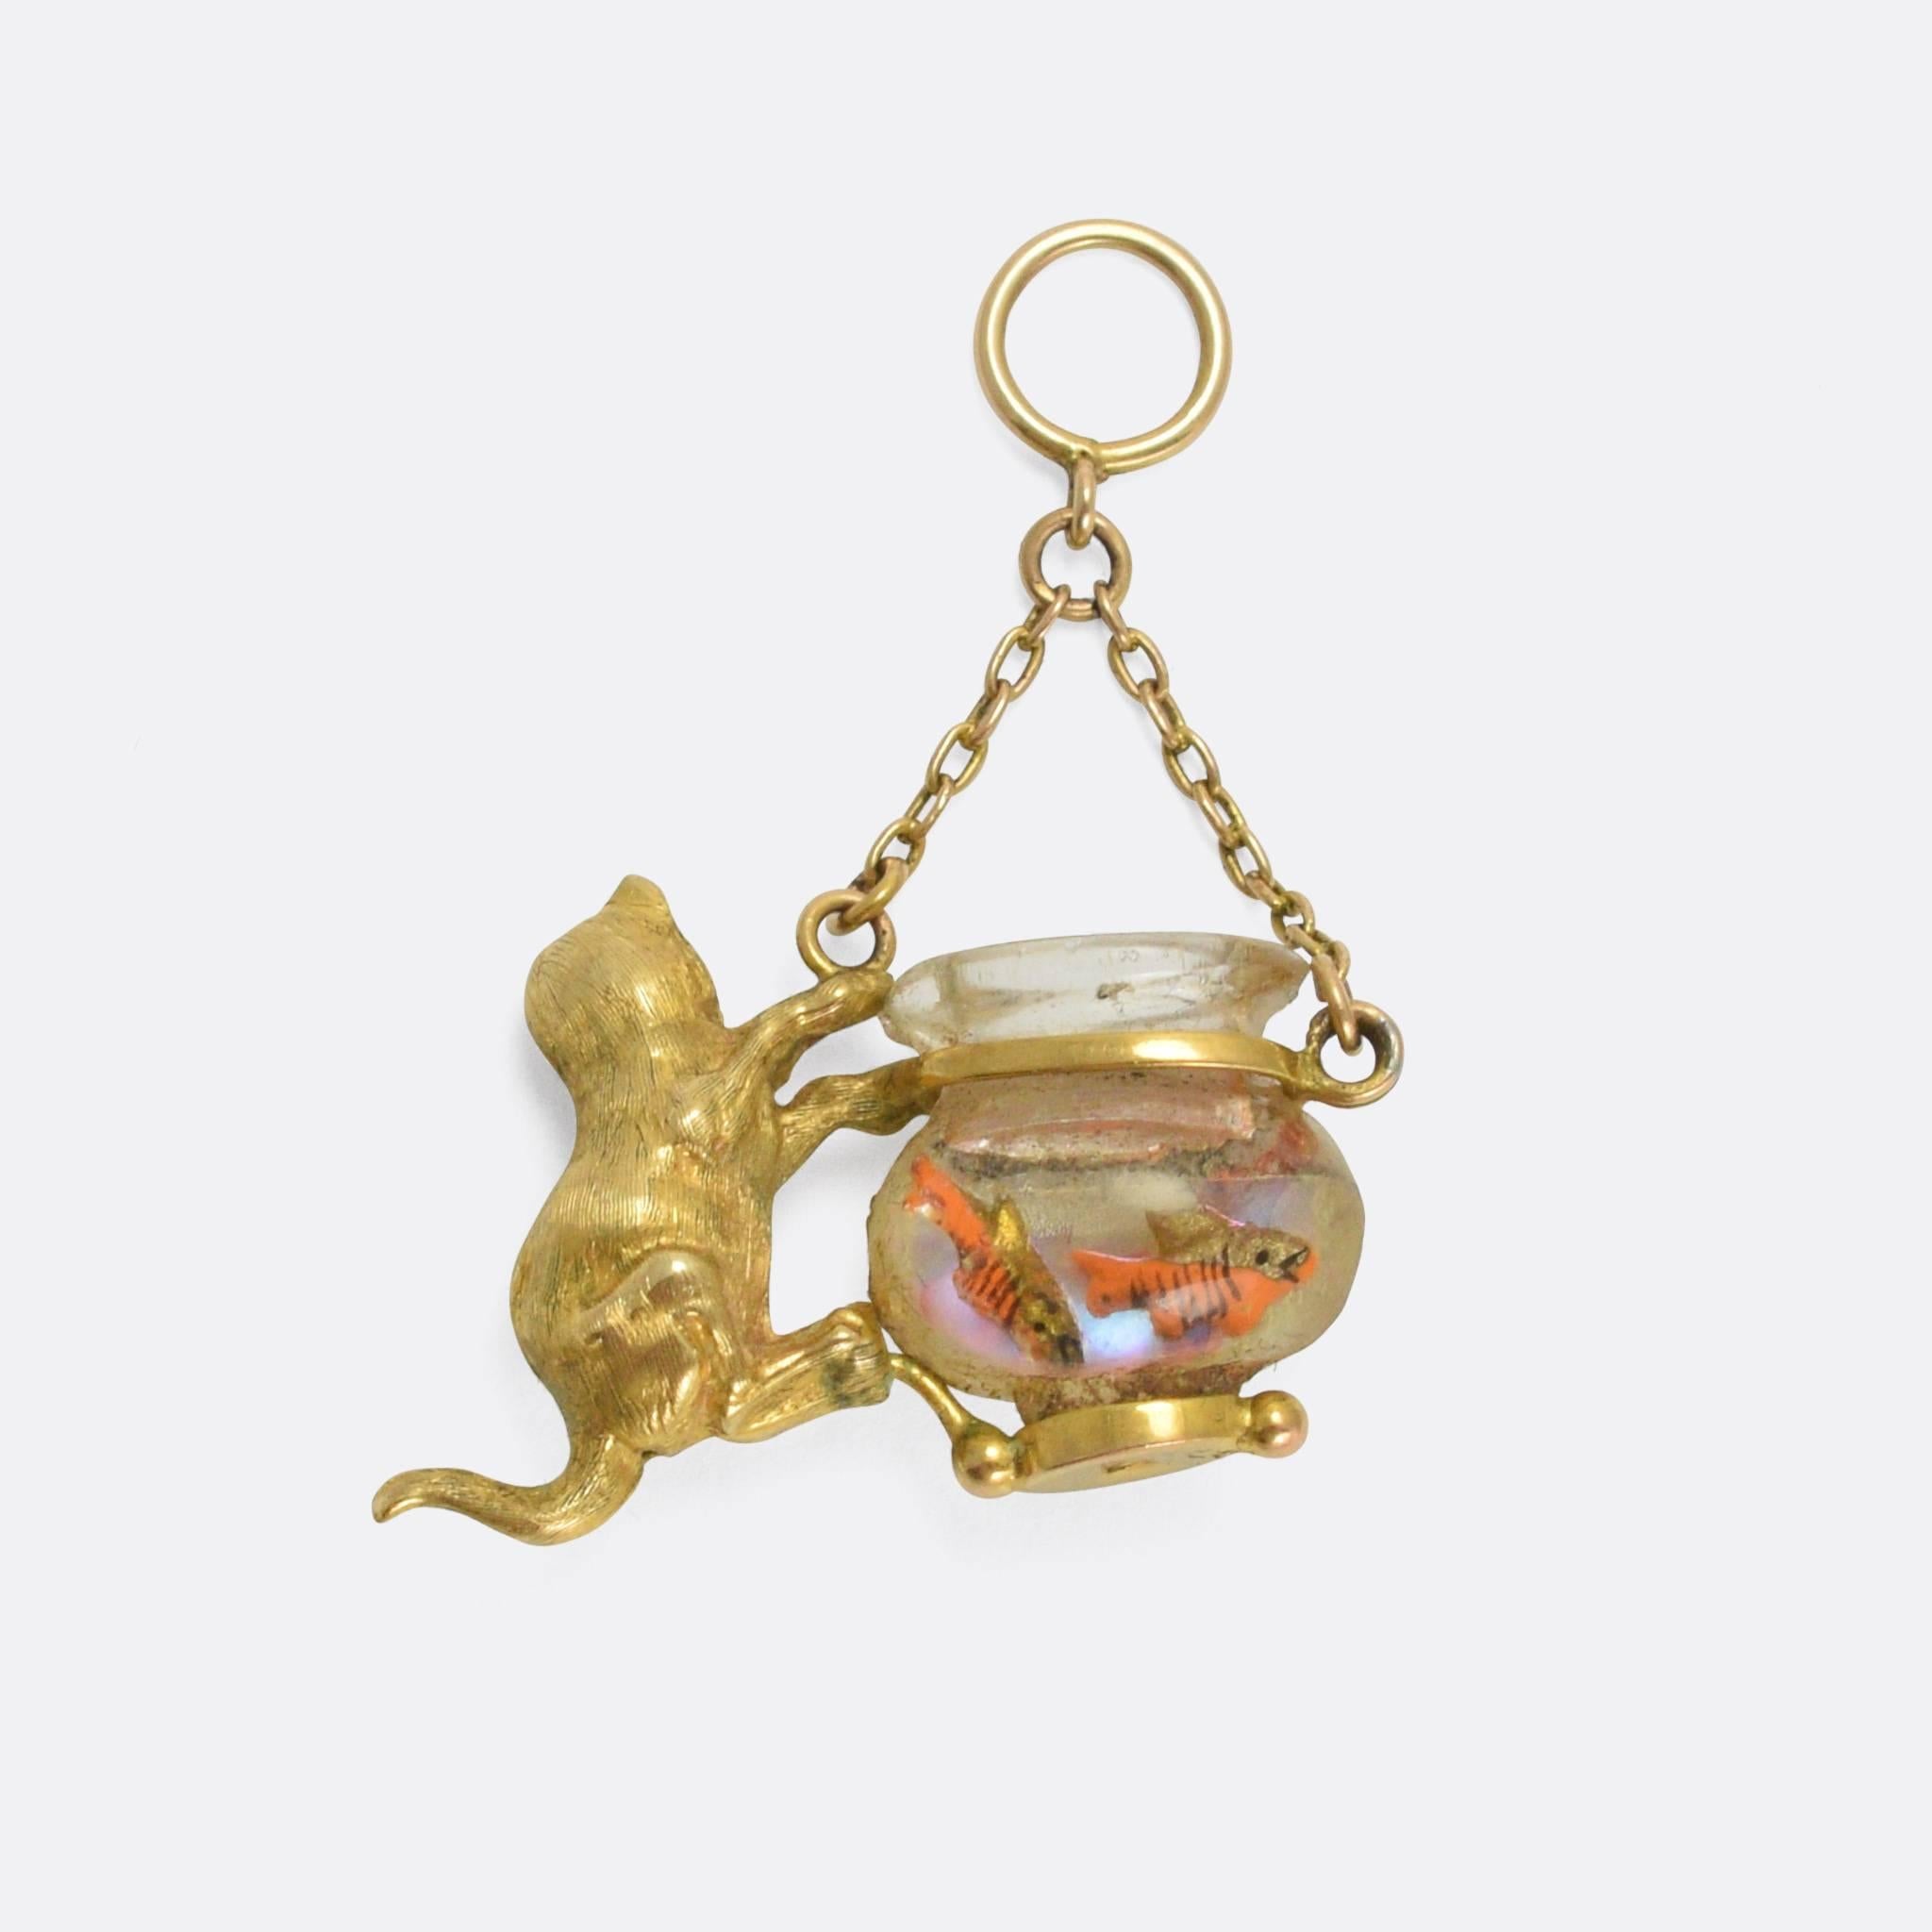 A cute antique novelty pendant, modelled as a golden cat eyeing up a goldfish bowl. The kitty is beautifully detailed, and has been set with emerald eyes, while the bowl is made from moulded glass that has been cleverly reverse carved with fish and